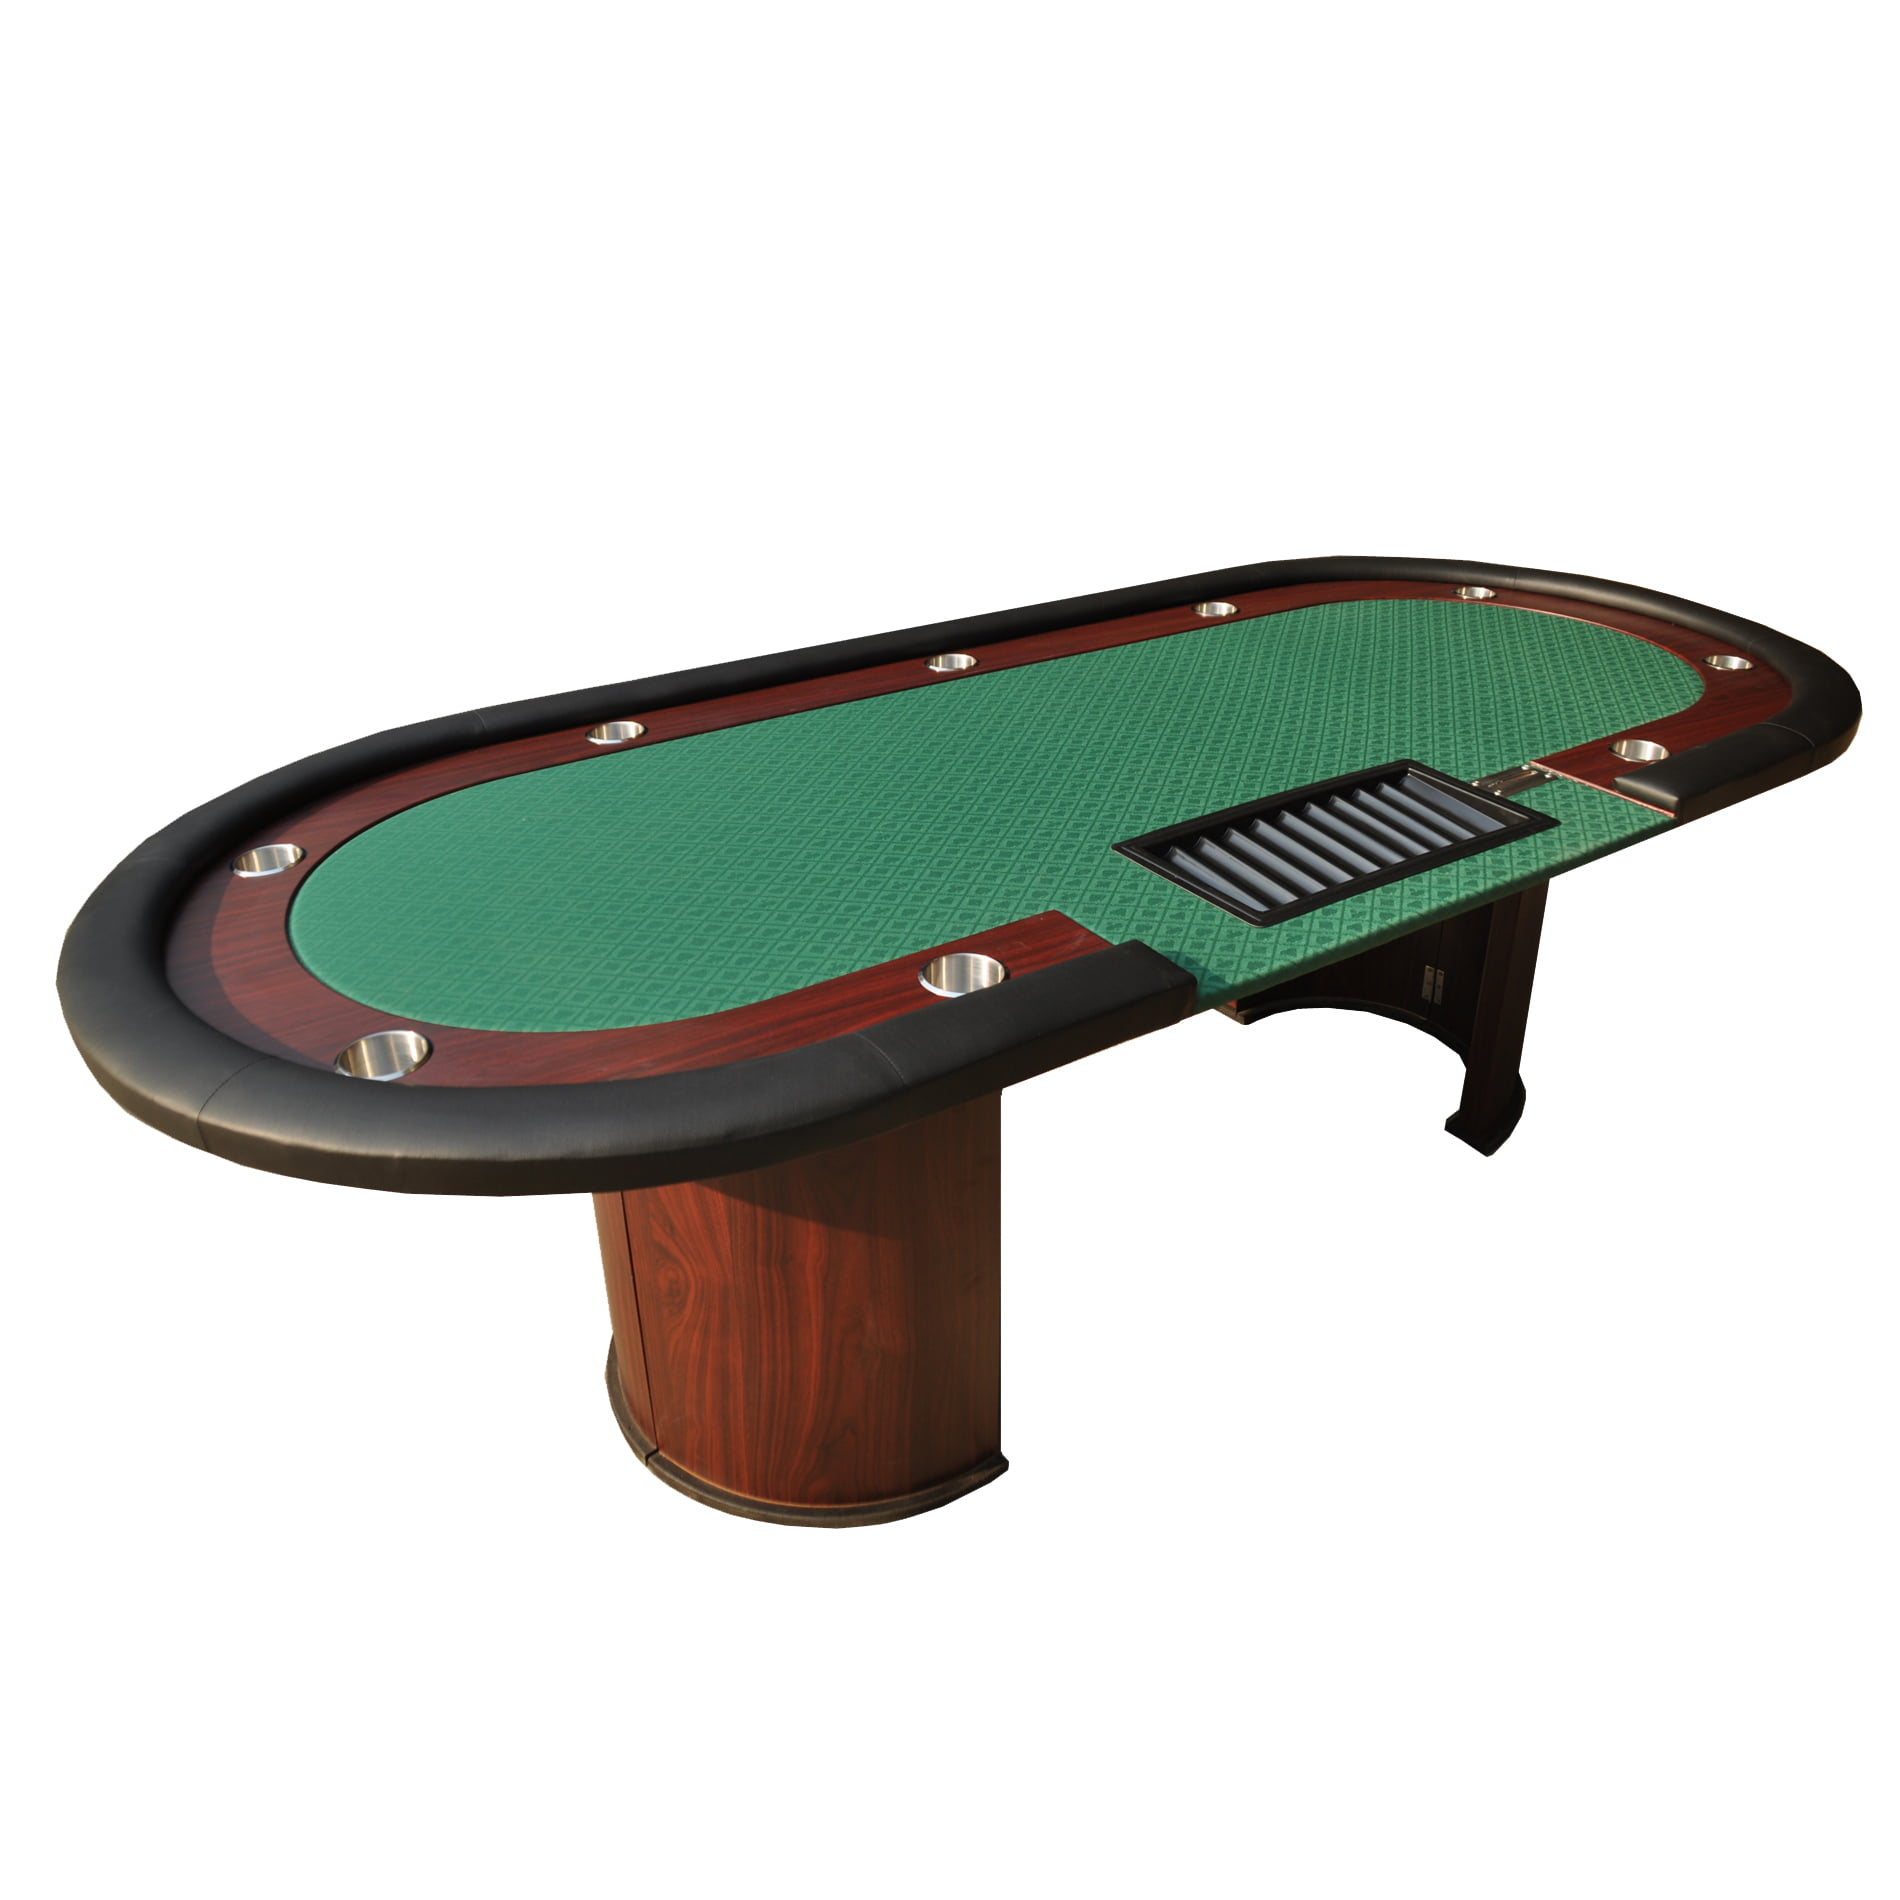 Poker Table Casino Style 10 Player Table with Padded Rails and Steel Cup Holders 